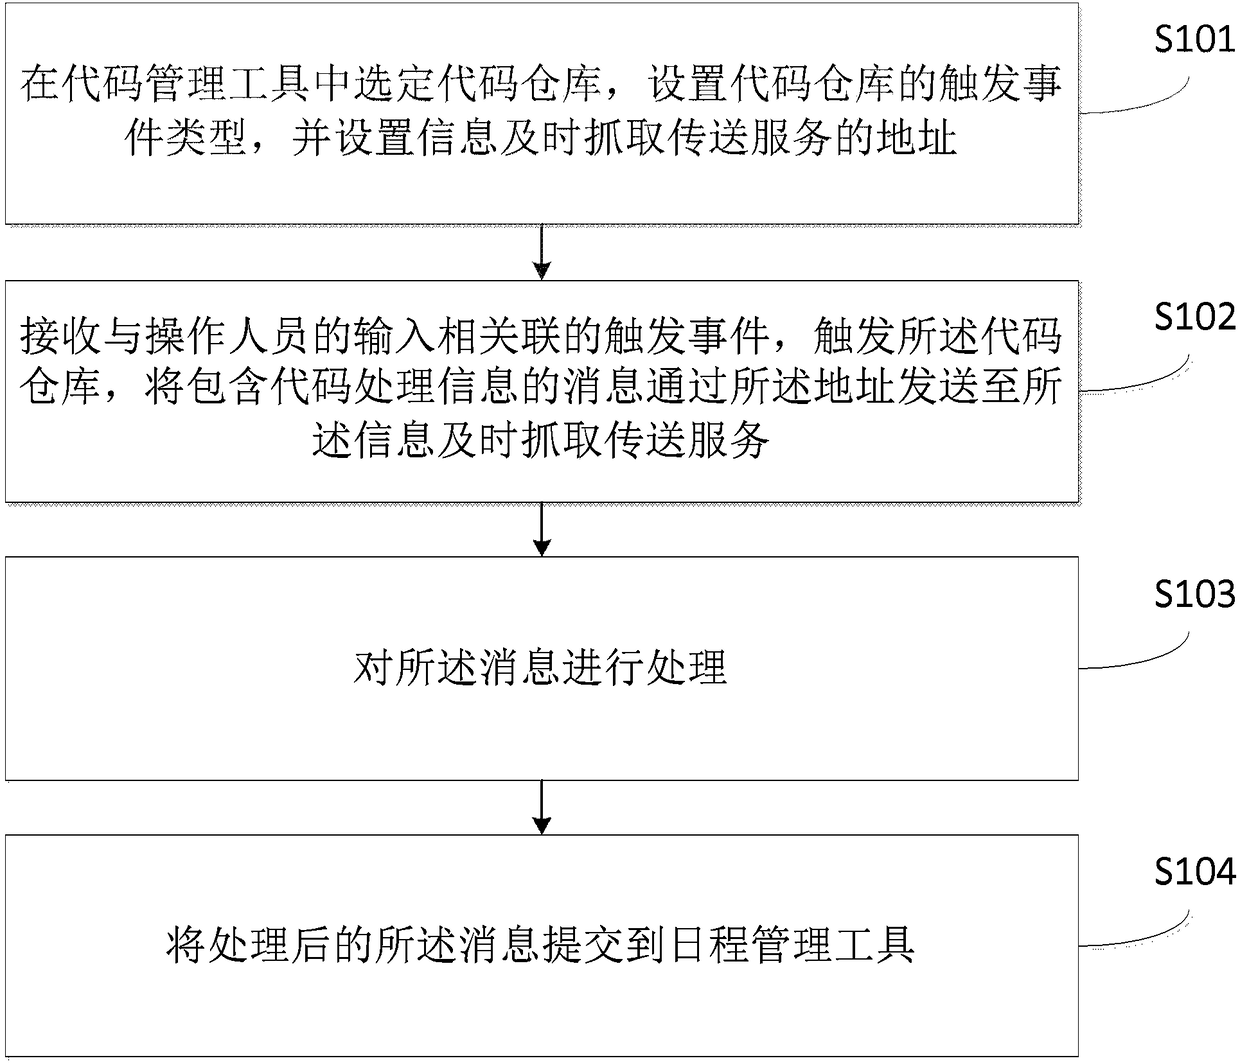 Automatic storage code processing and recording method, readable storage medium and electronic device